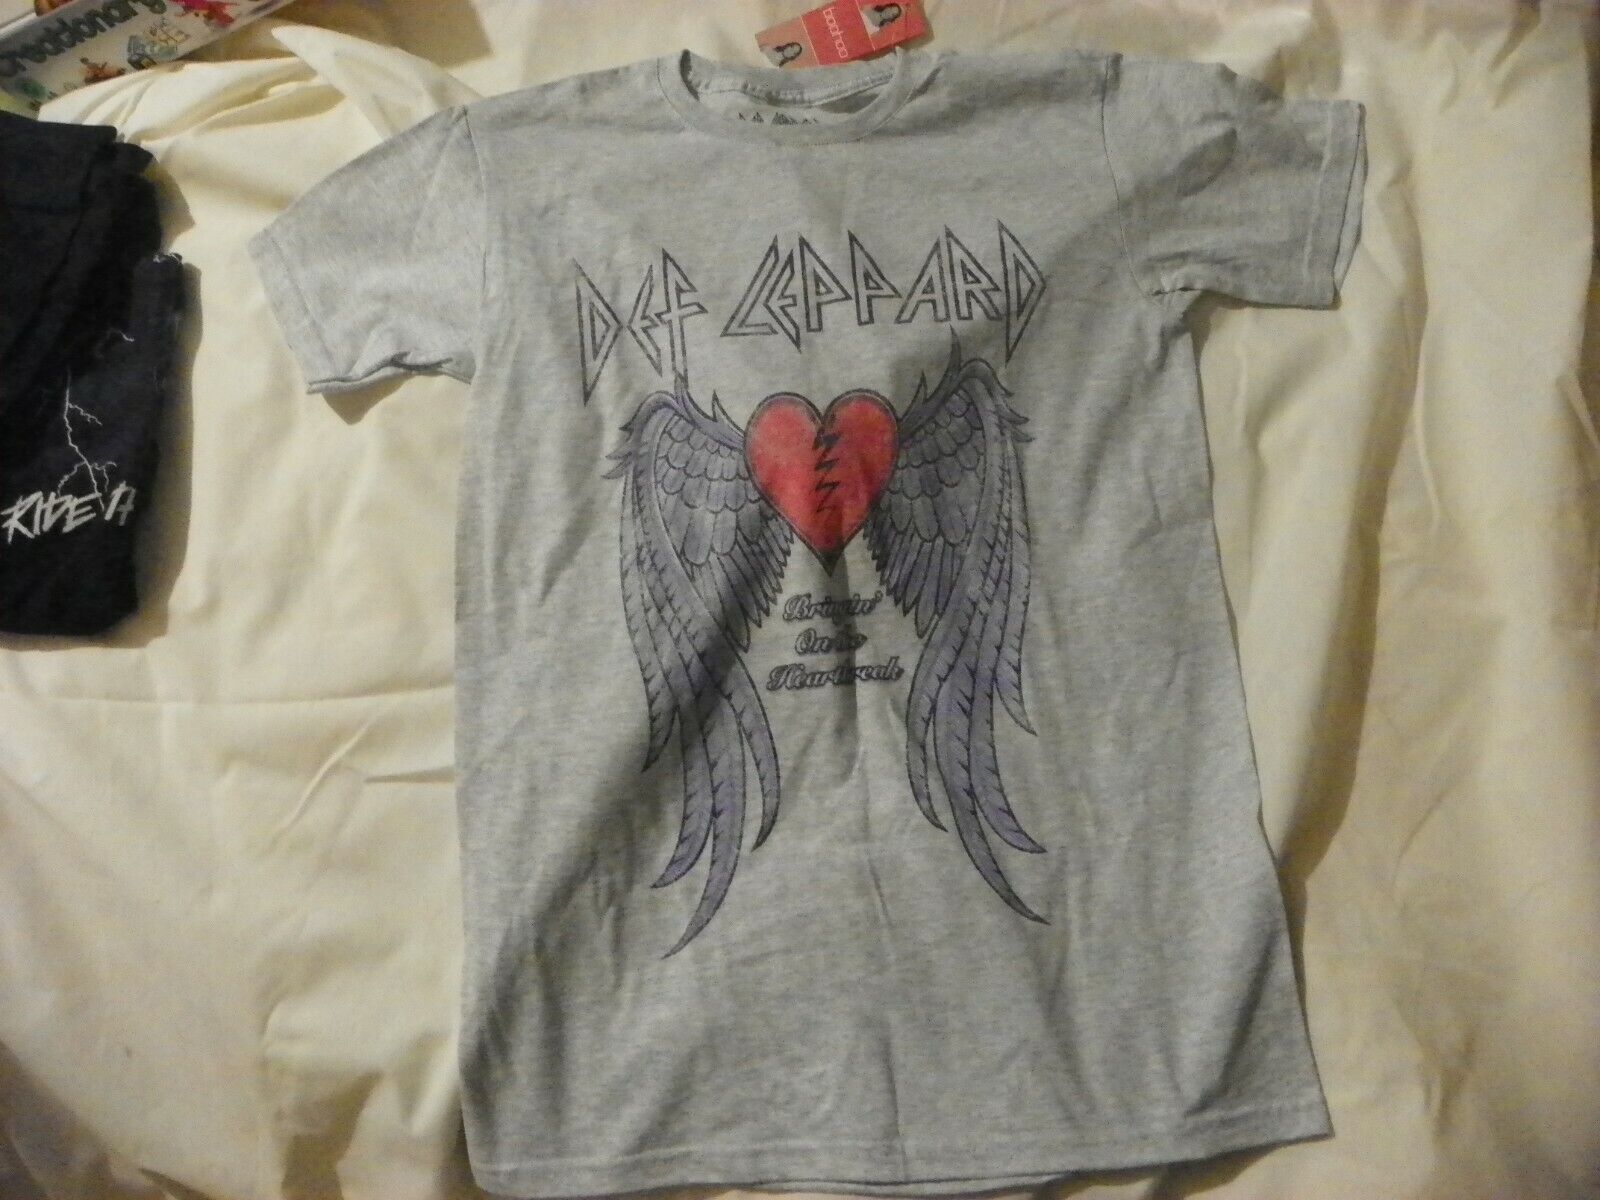 BOOHOO DEF LEPPARD WINGS LICENSE T SHIRT GREY SIZE SMALL